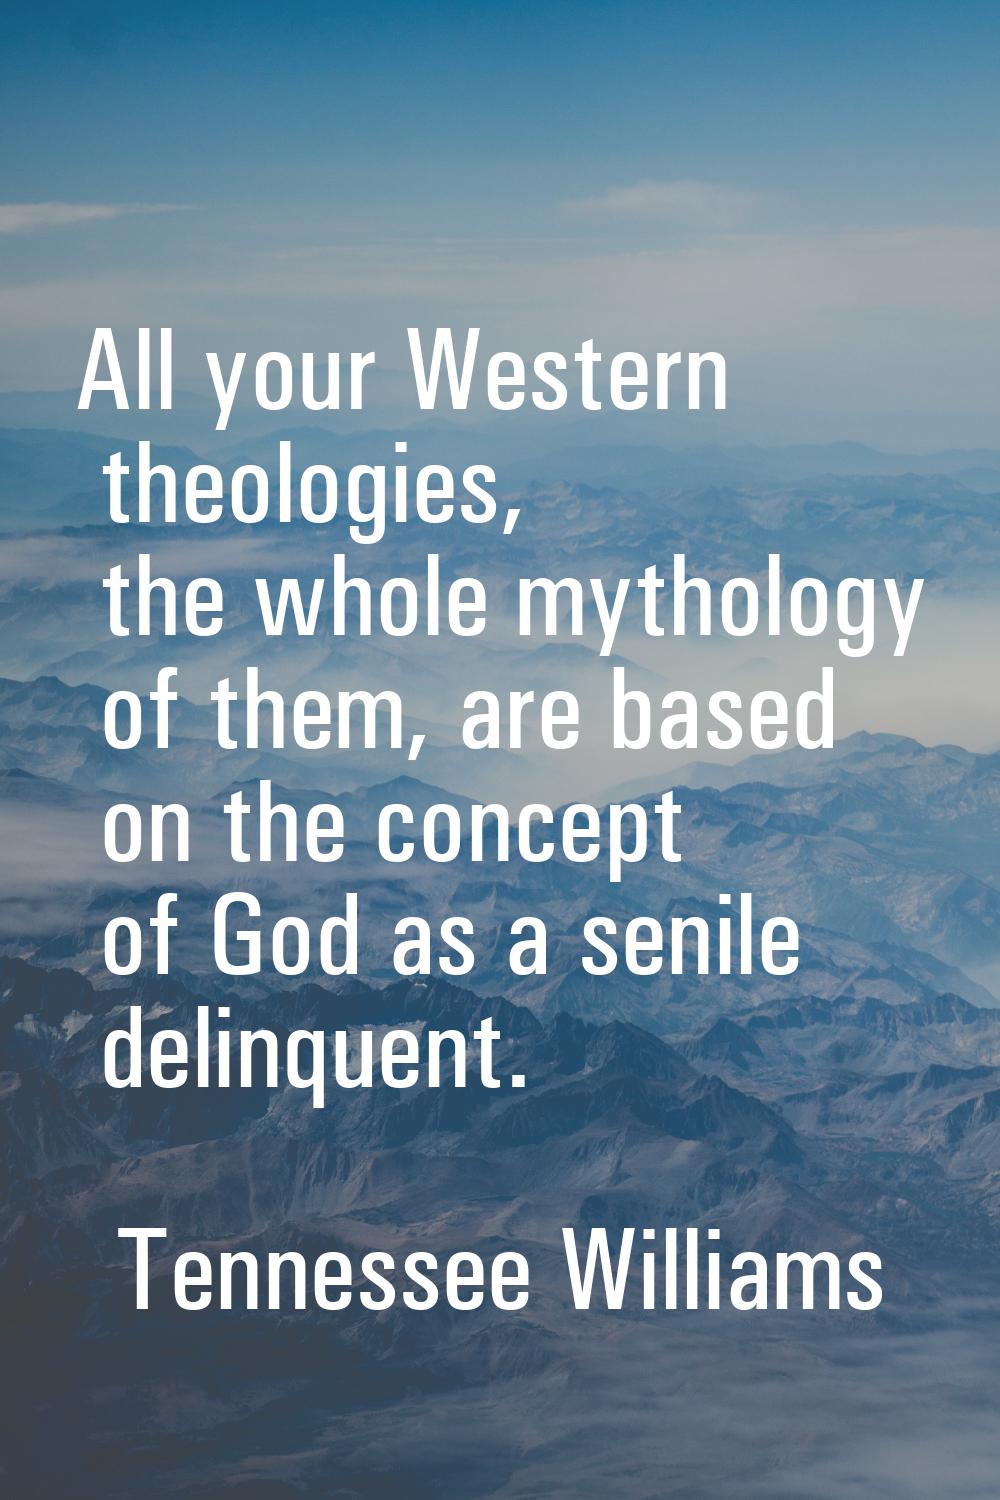 All your Western theologies, the whole mythology of them, are based on the concept of God as a seni